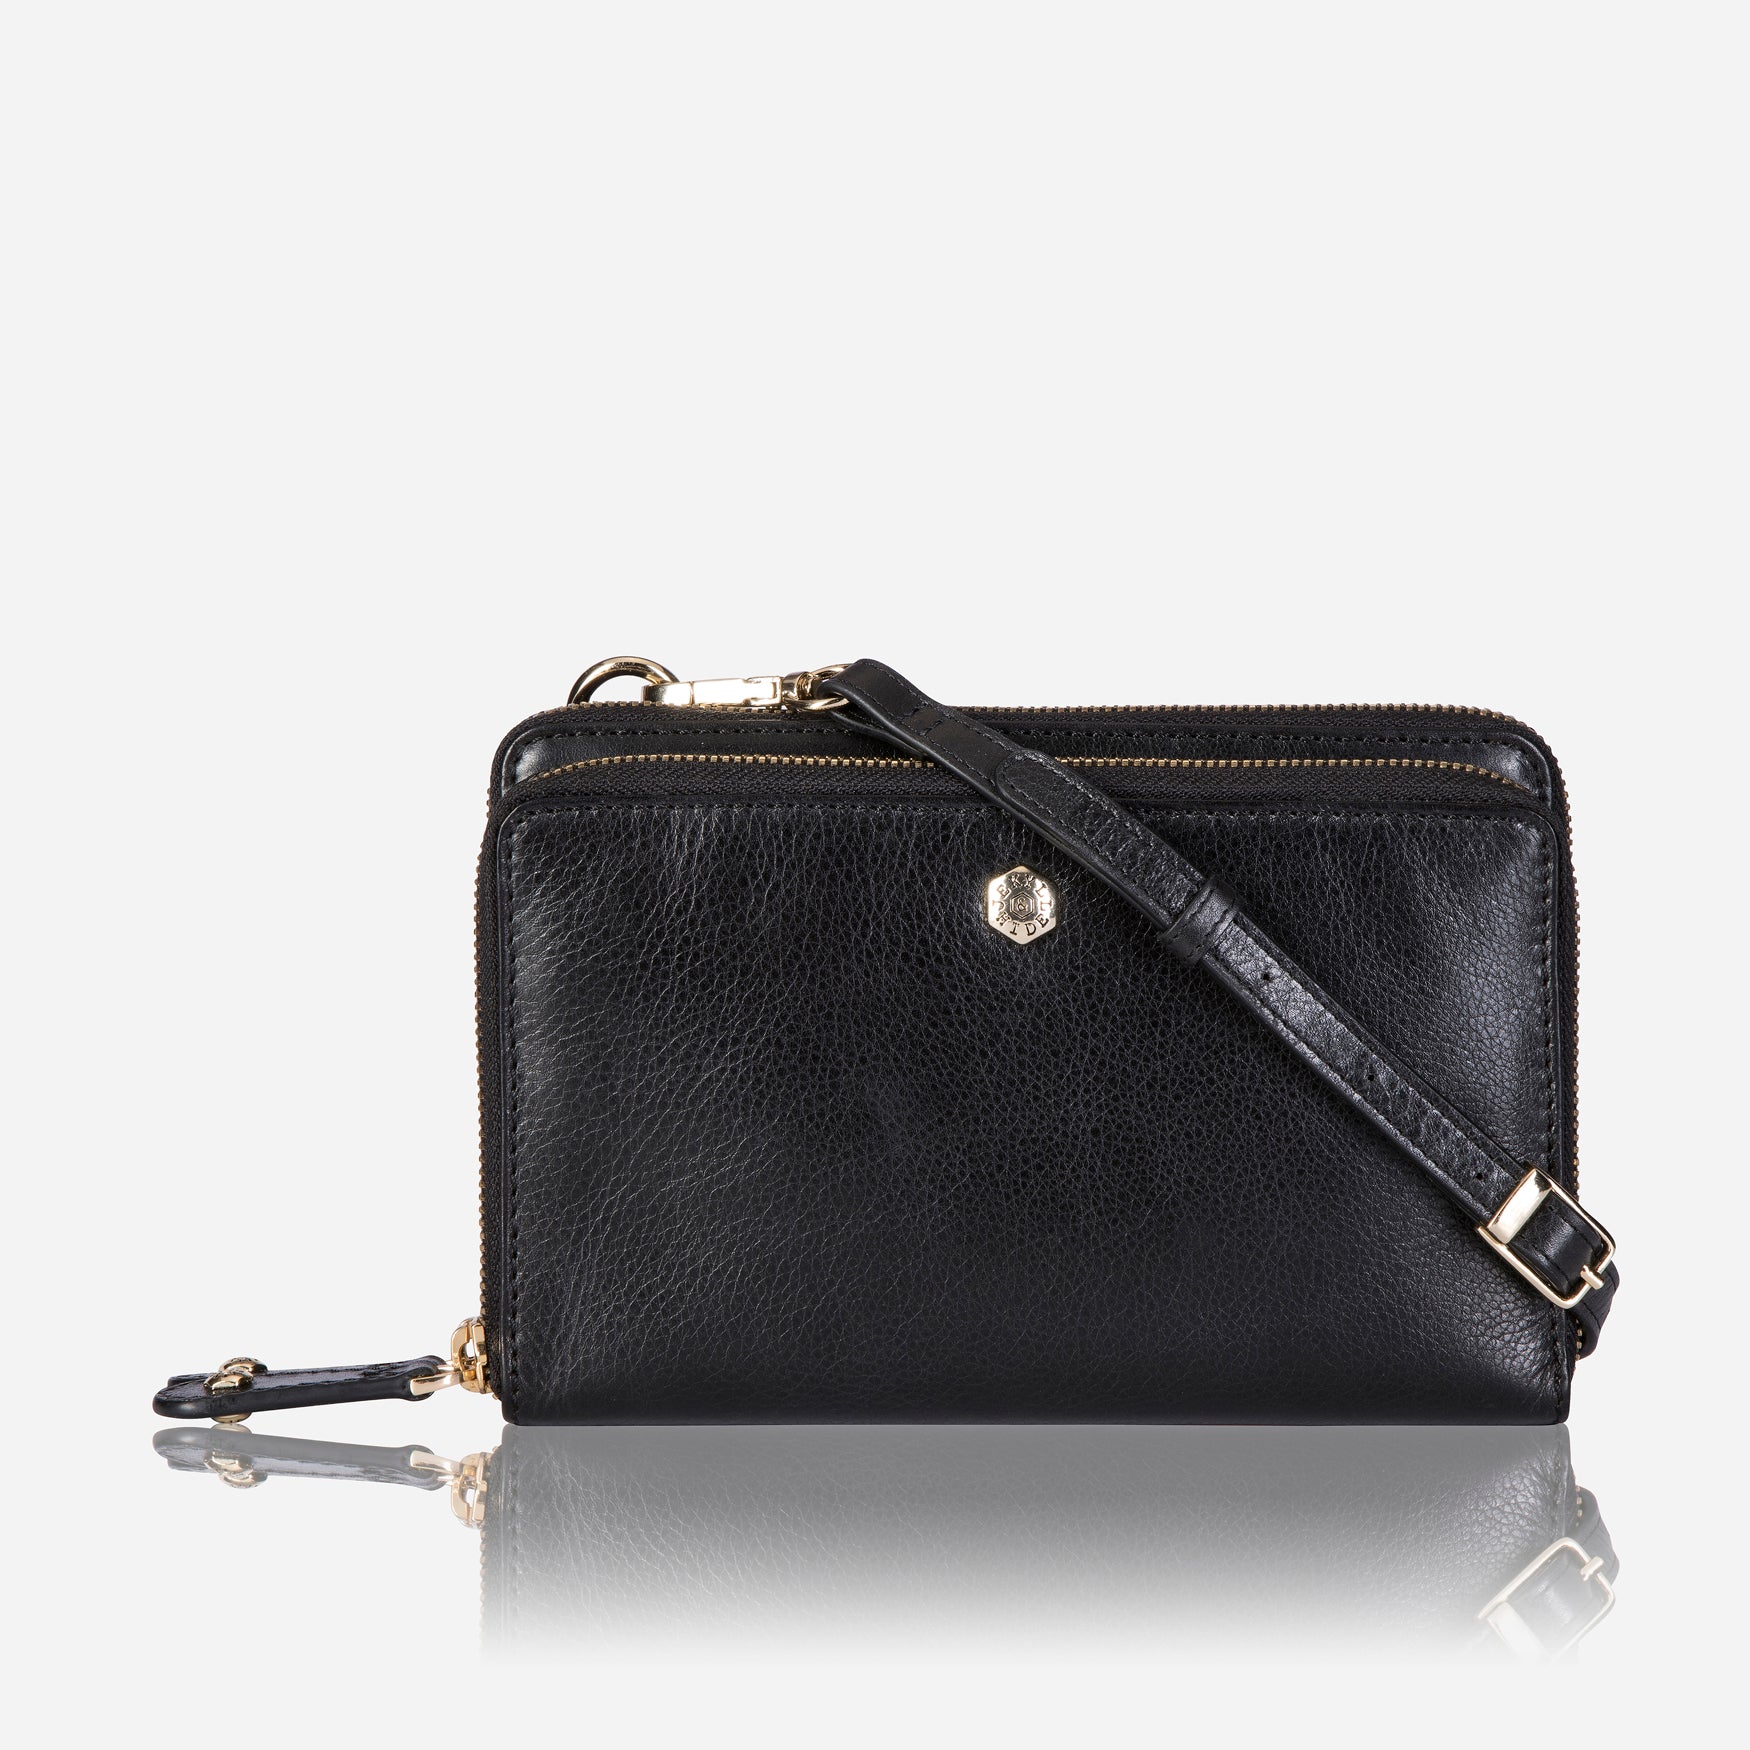 Ladies Purse with Detachable Strap, Black - Jekyll and Hide SA